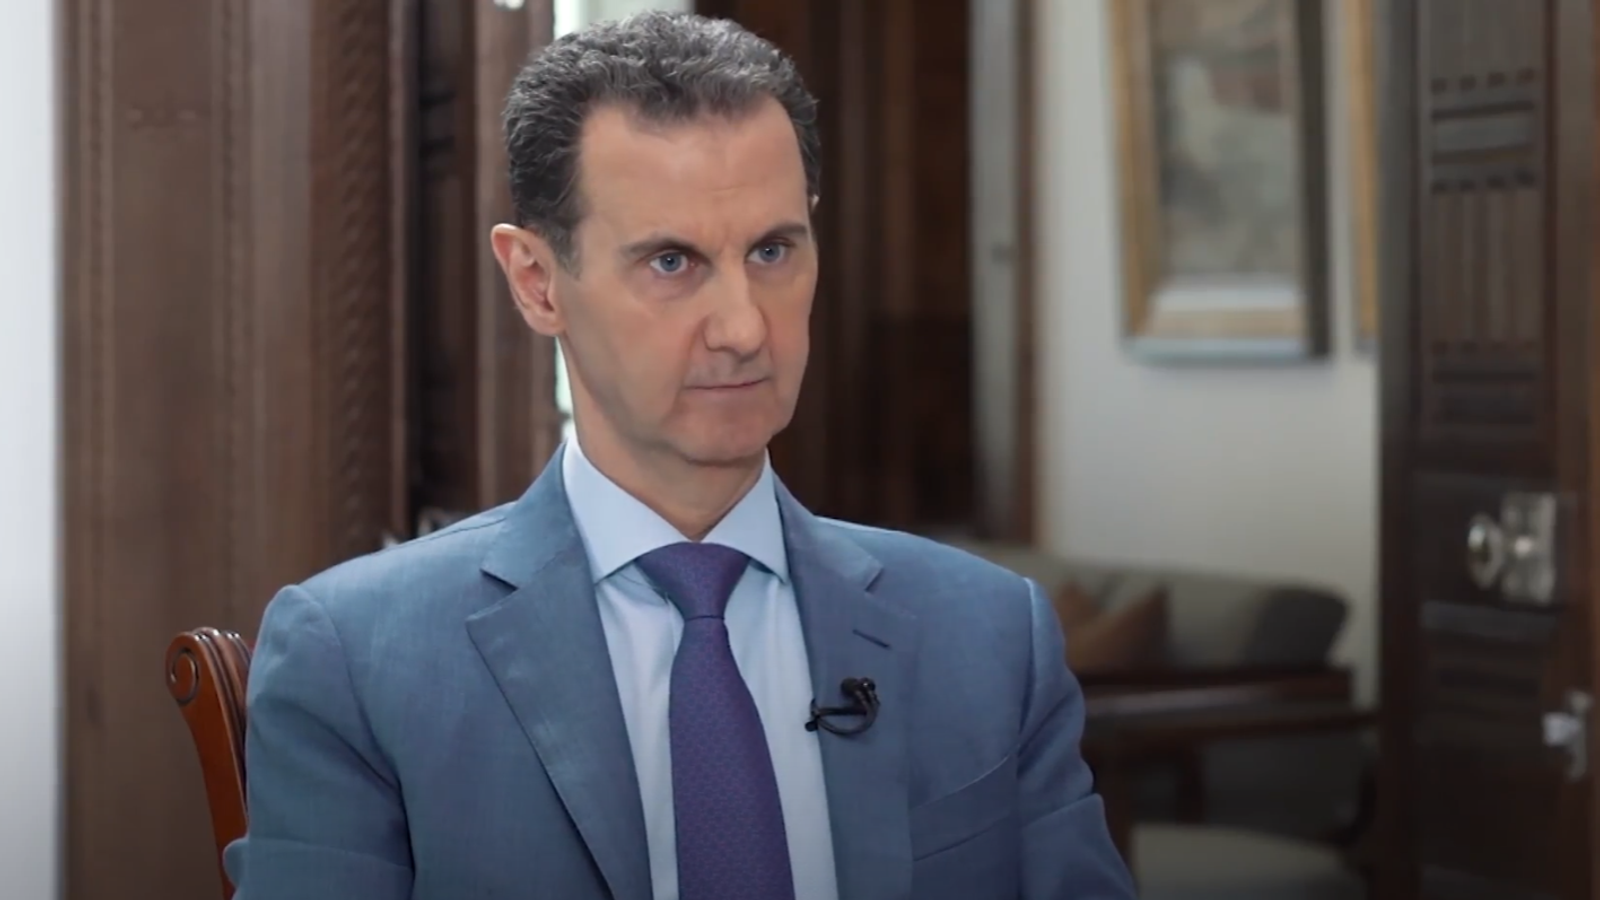 Syria's President Assad would 'welcome home refugees'